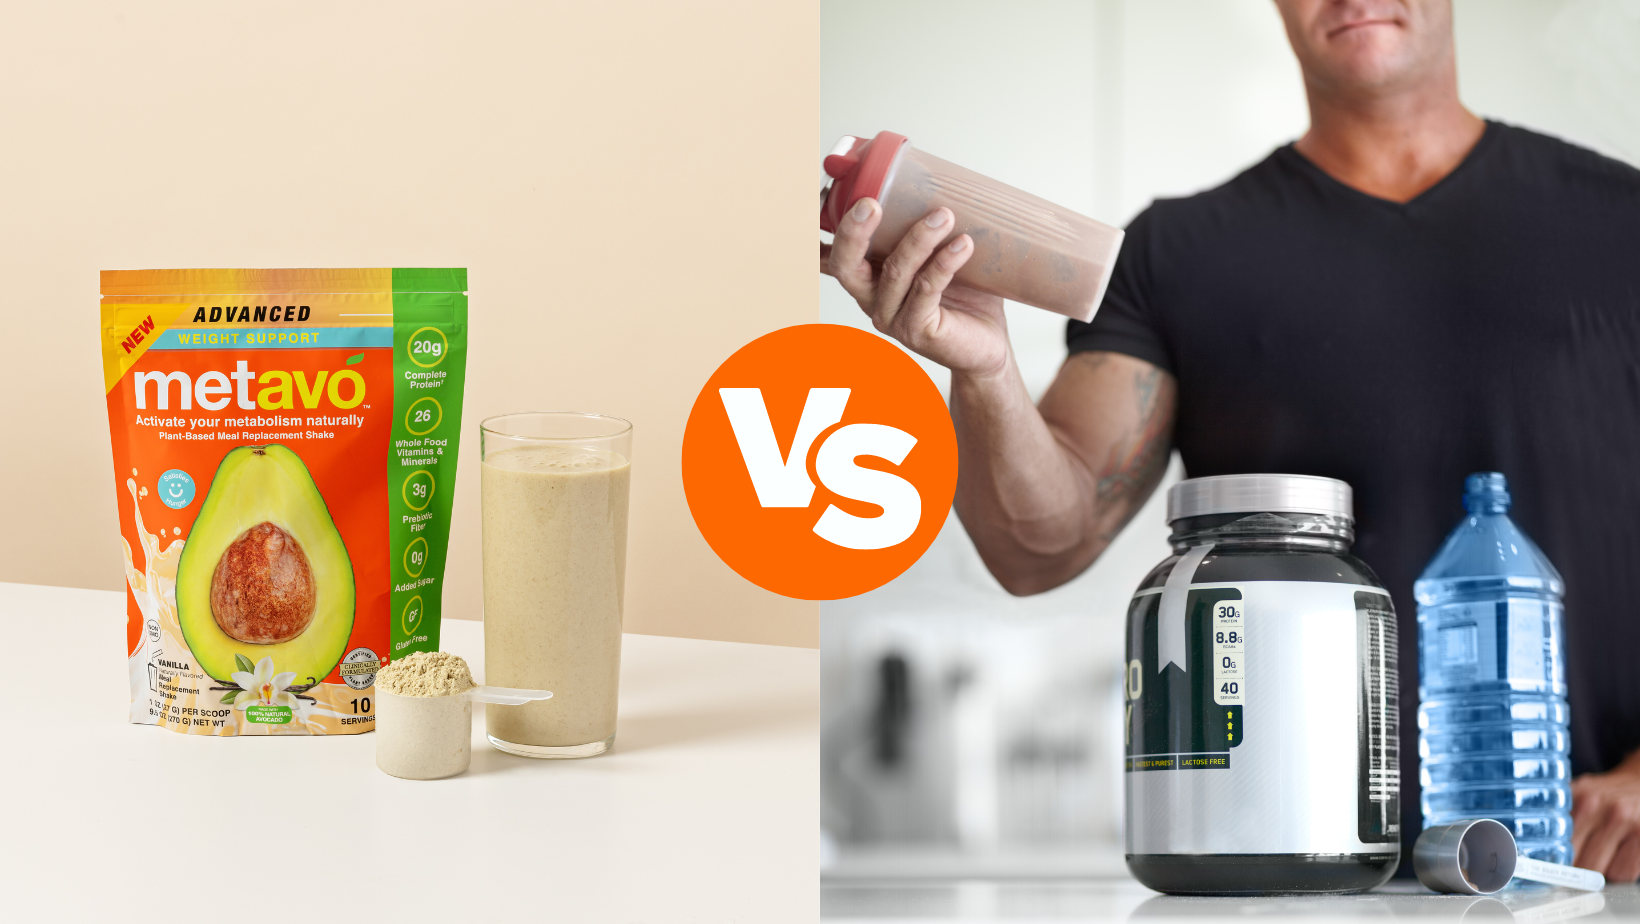 Meal Replacement Shake vs Protein Shake: Which Should I Drink?